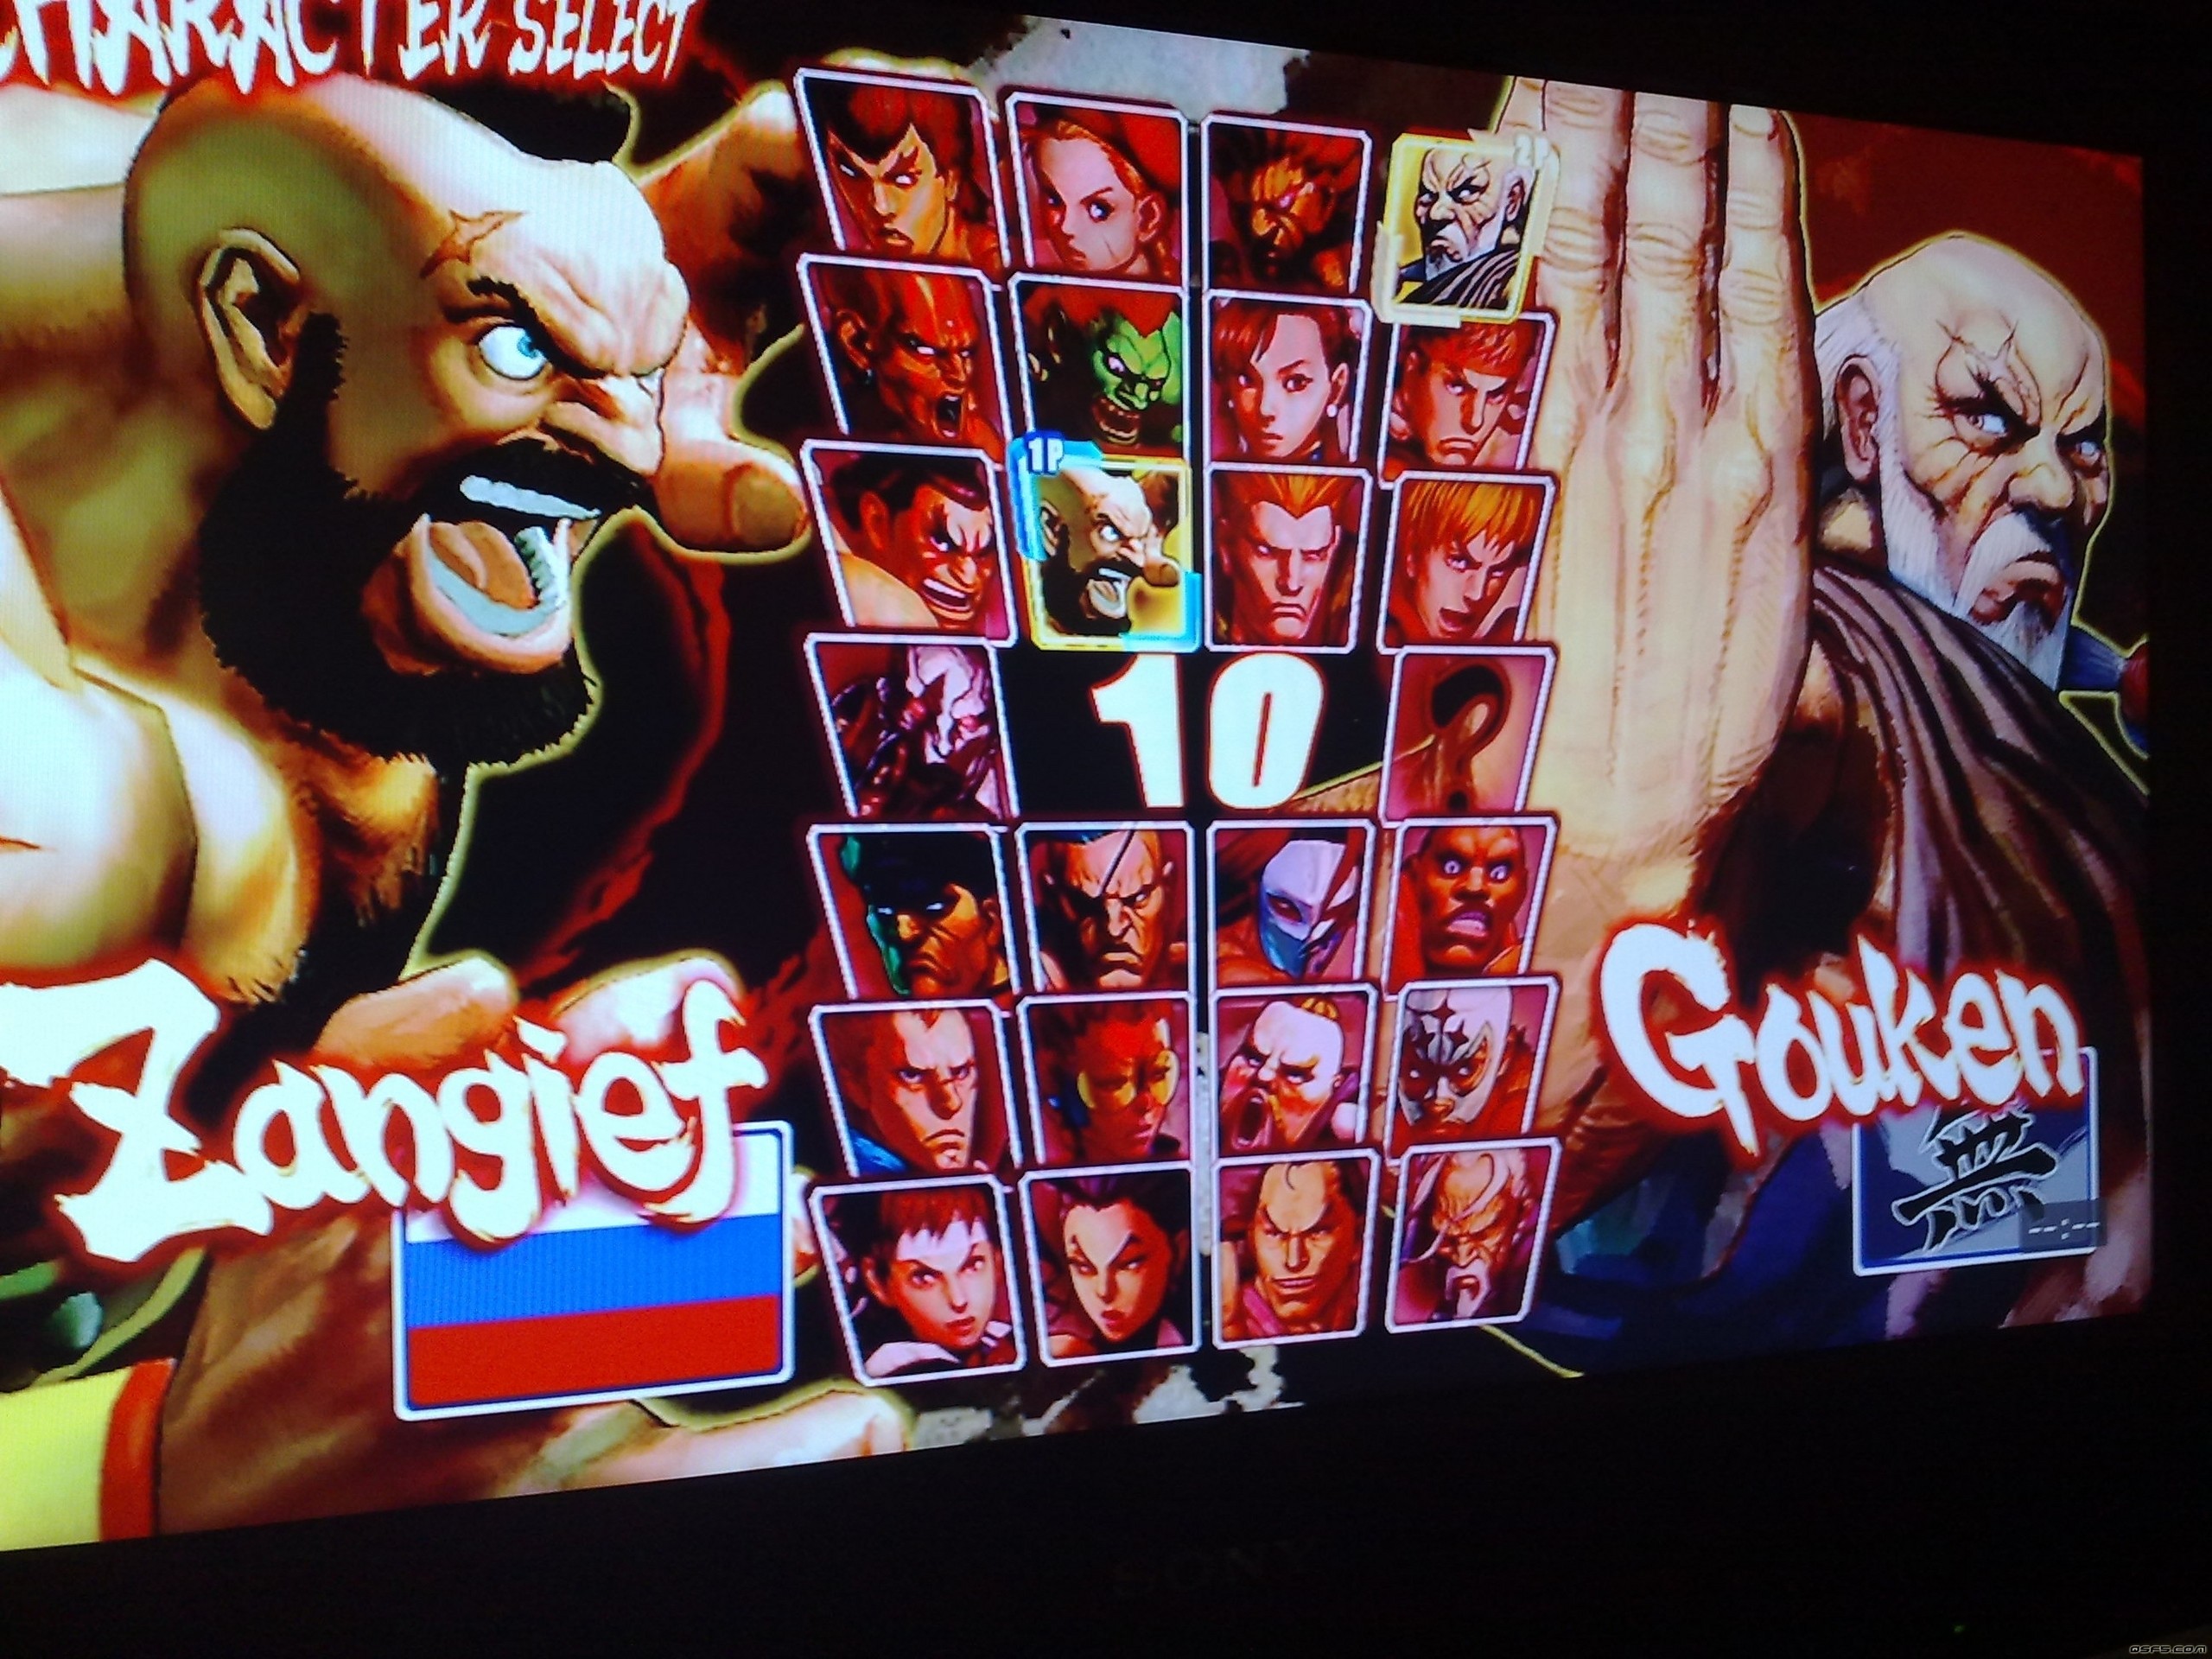 2560x1920 Capcom images sfIV Roster HD wallpaper and background photos